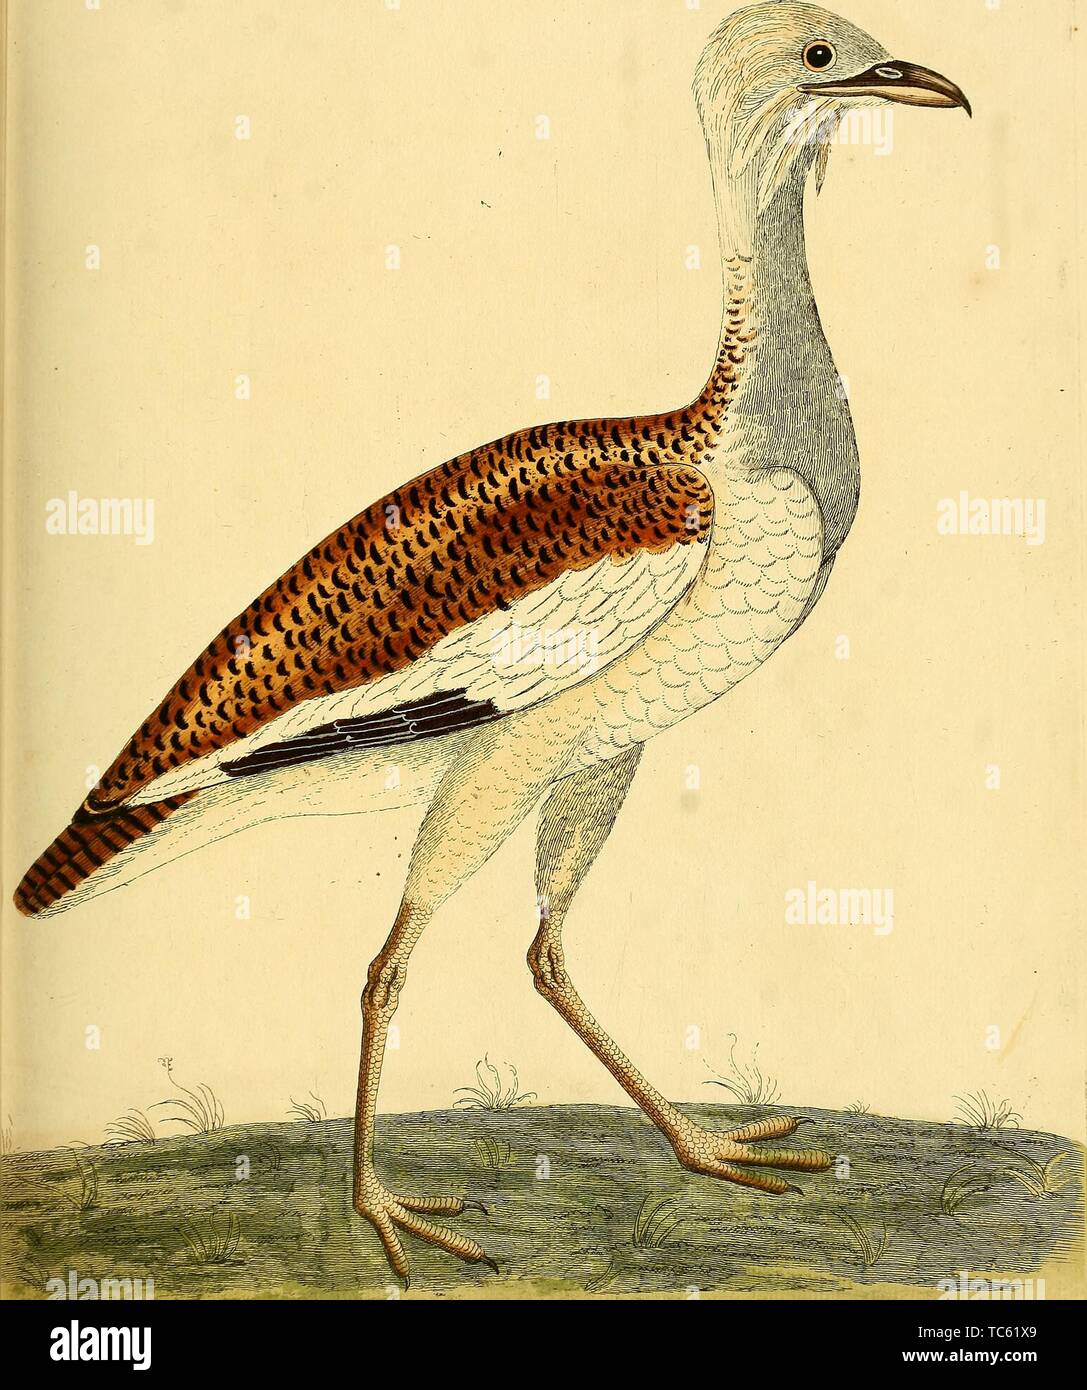 Engraving of the Great Bustard female (Otis tarda), from the book 'A natural history of birds' by Eleazar Albin, William Derham, and Jonathan Dwight, 1731. Courtesy Internet Archive. () Stock Photo